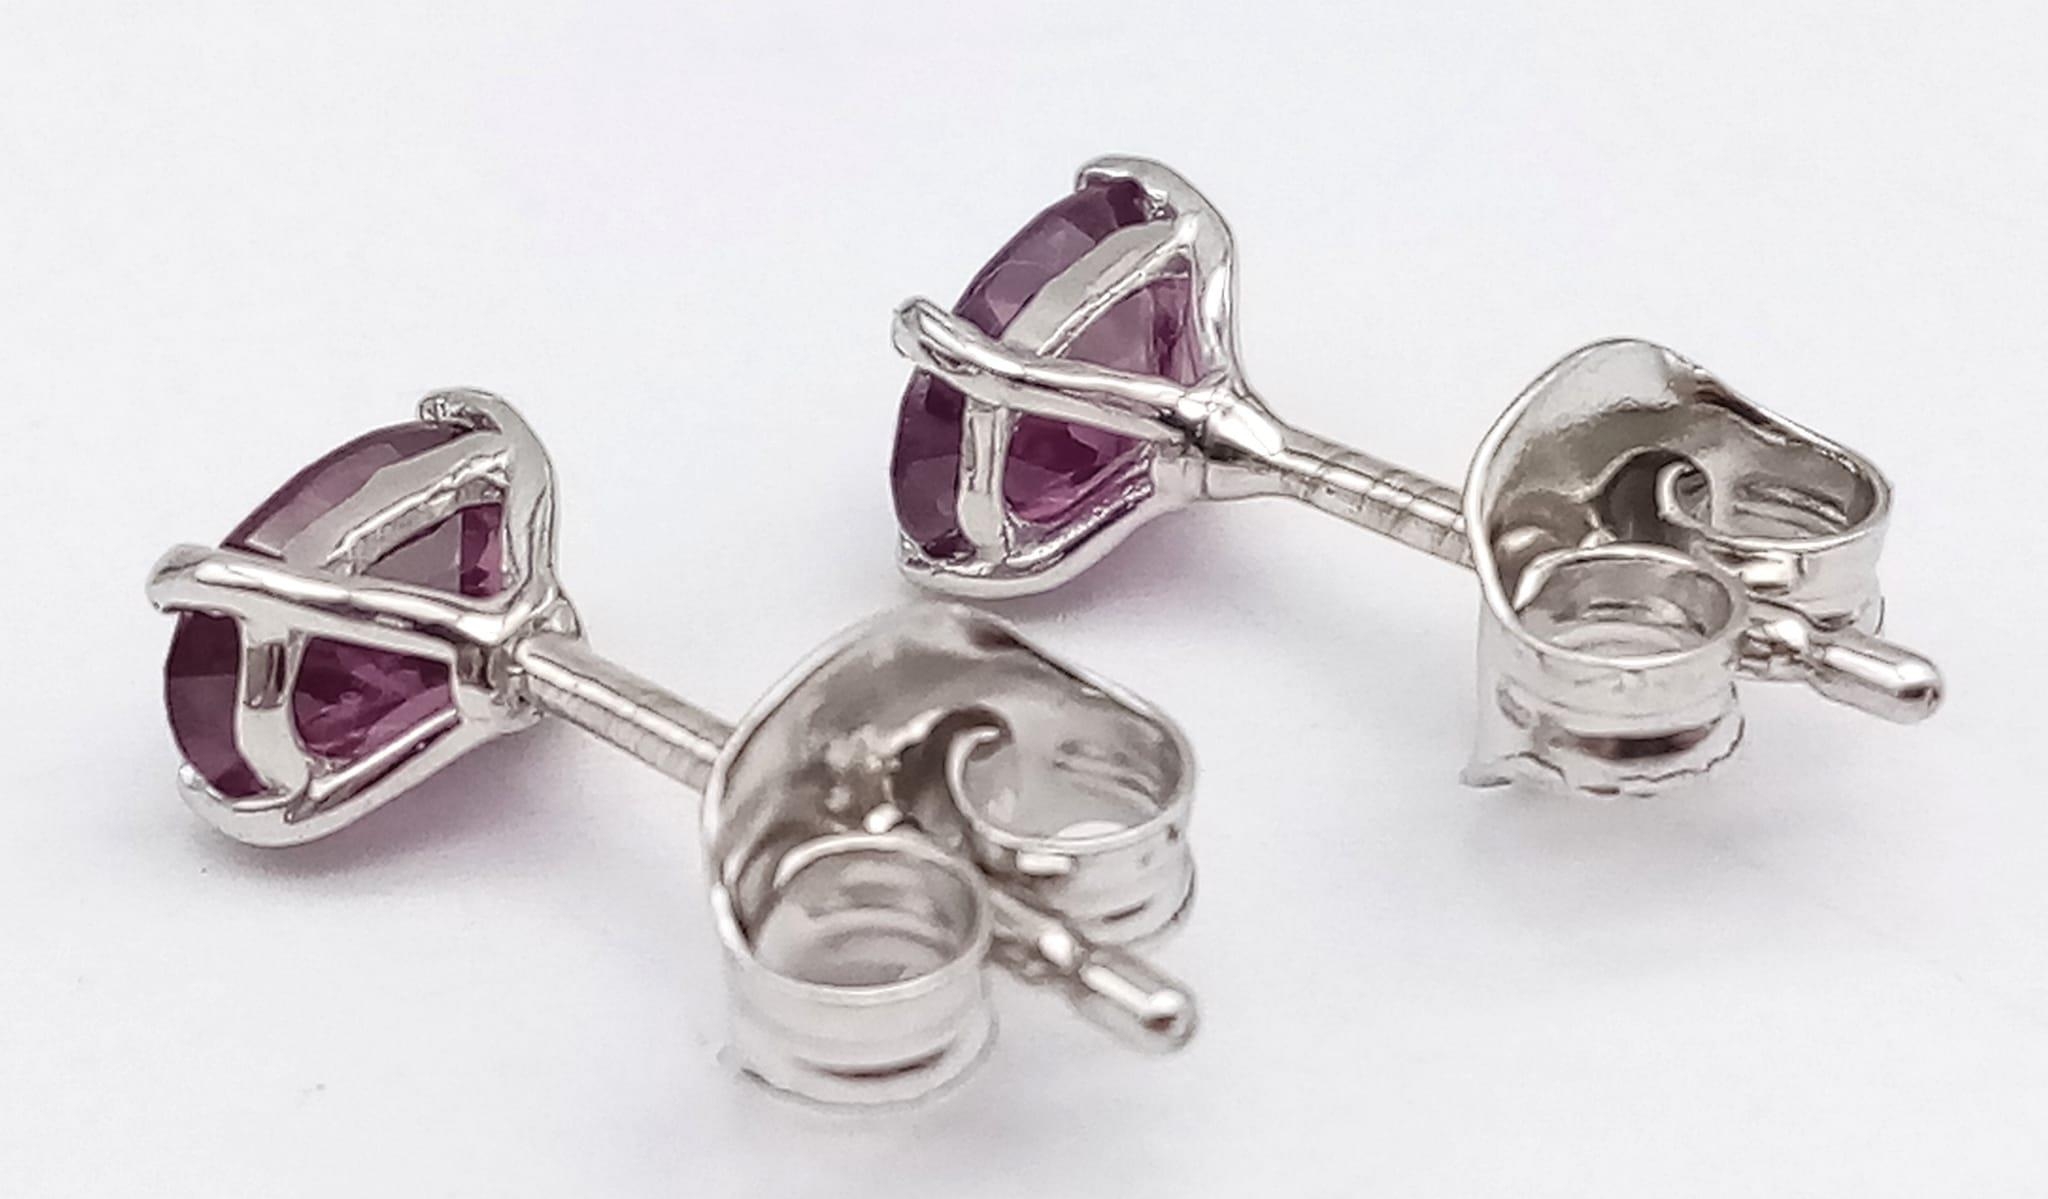 A Pair of 925 Silver and Garnet Stud Earrings. - Image 3 of 4